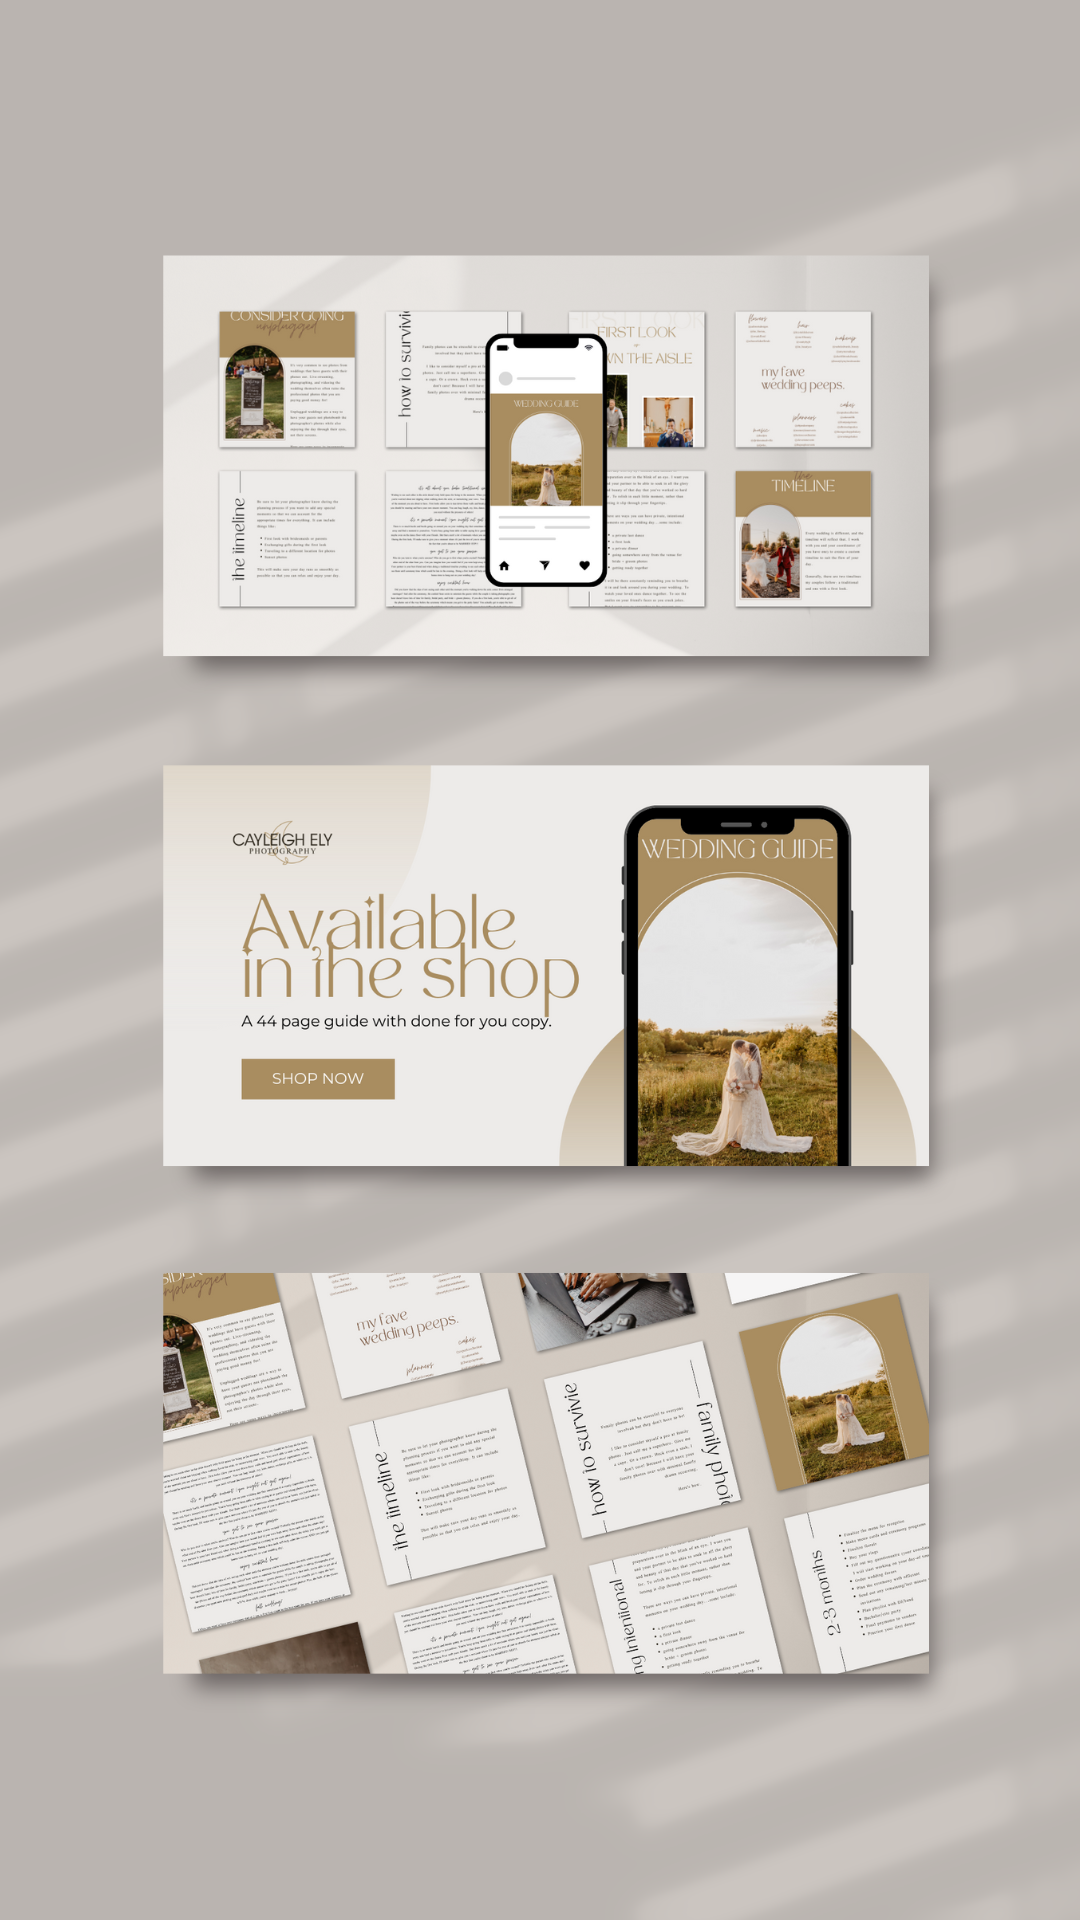 Wedding Welcome Guide Template